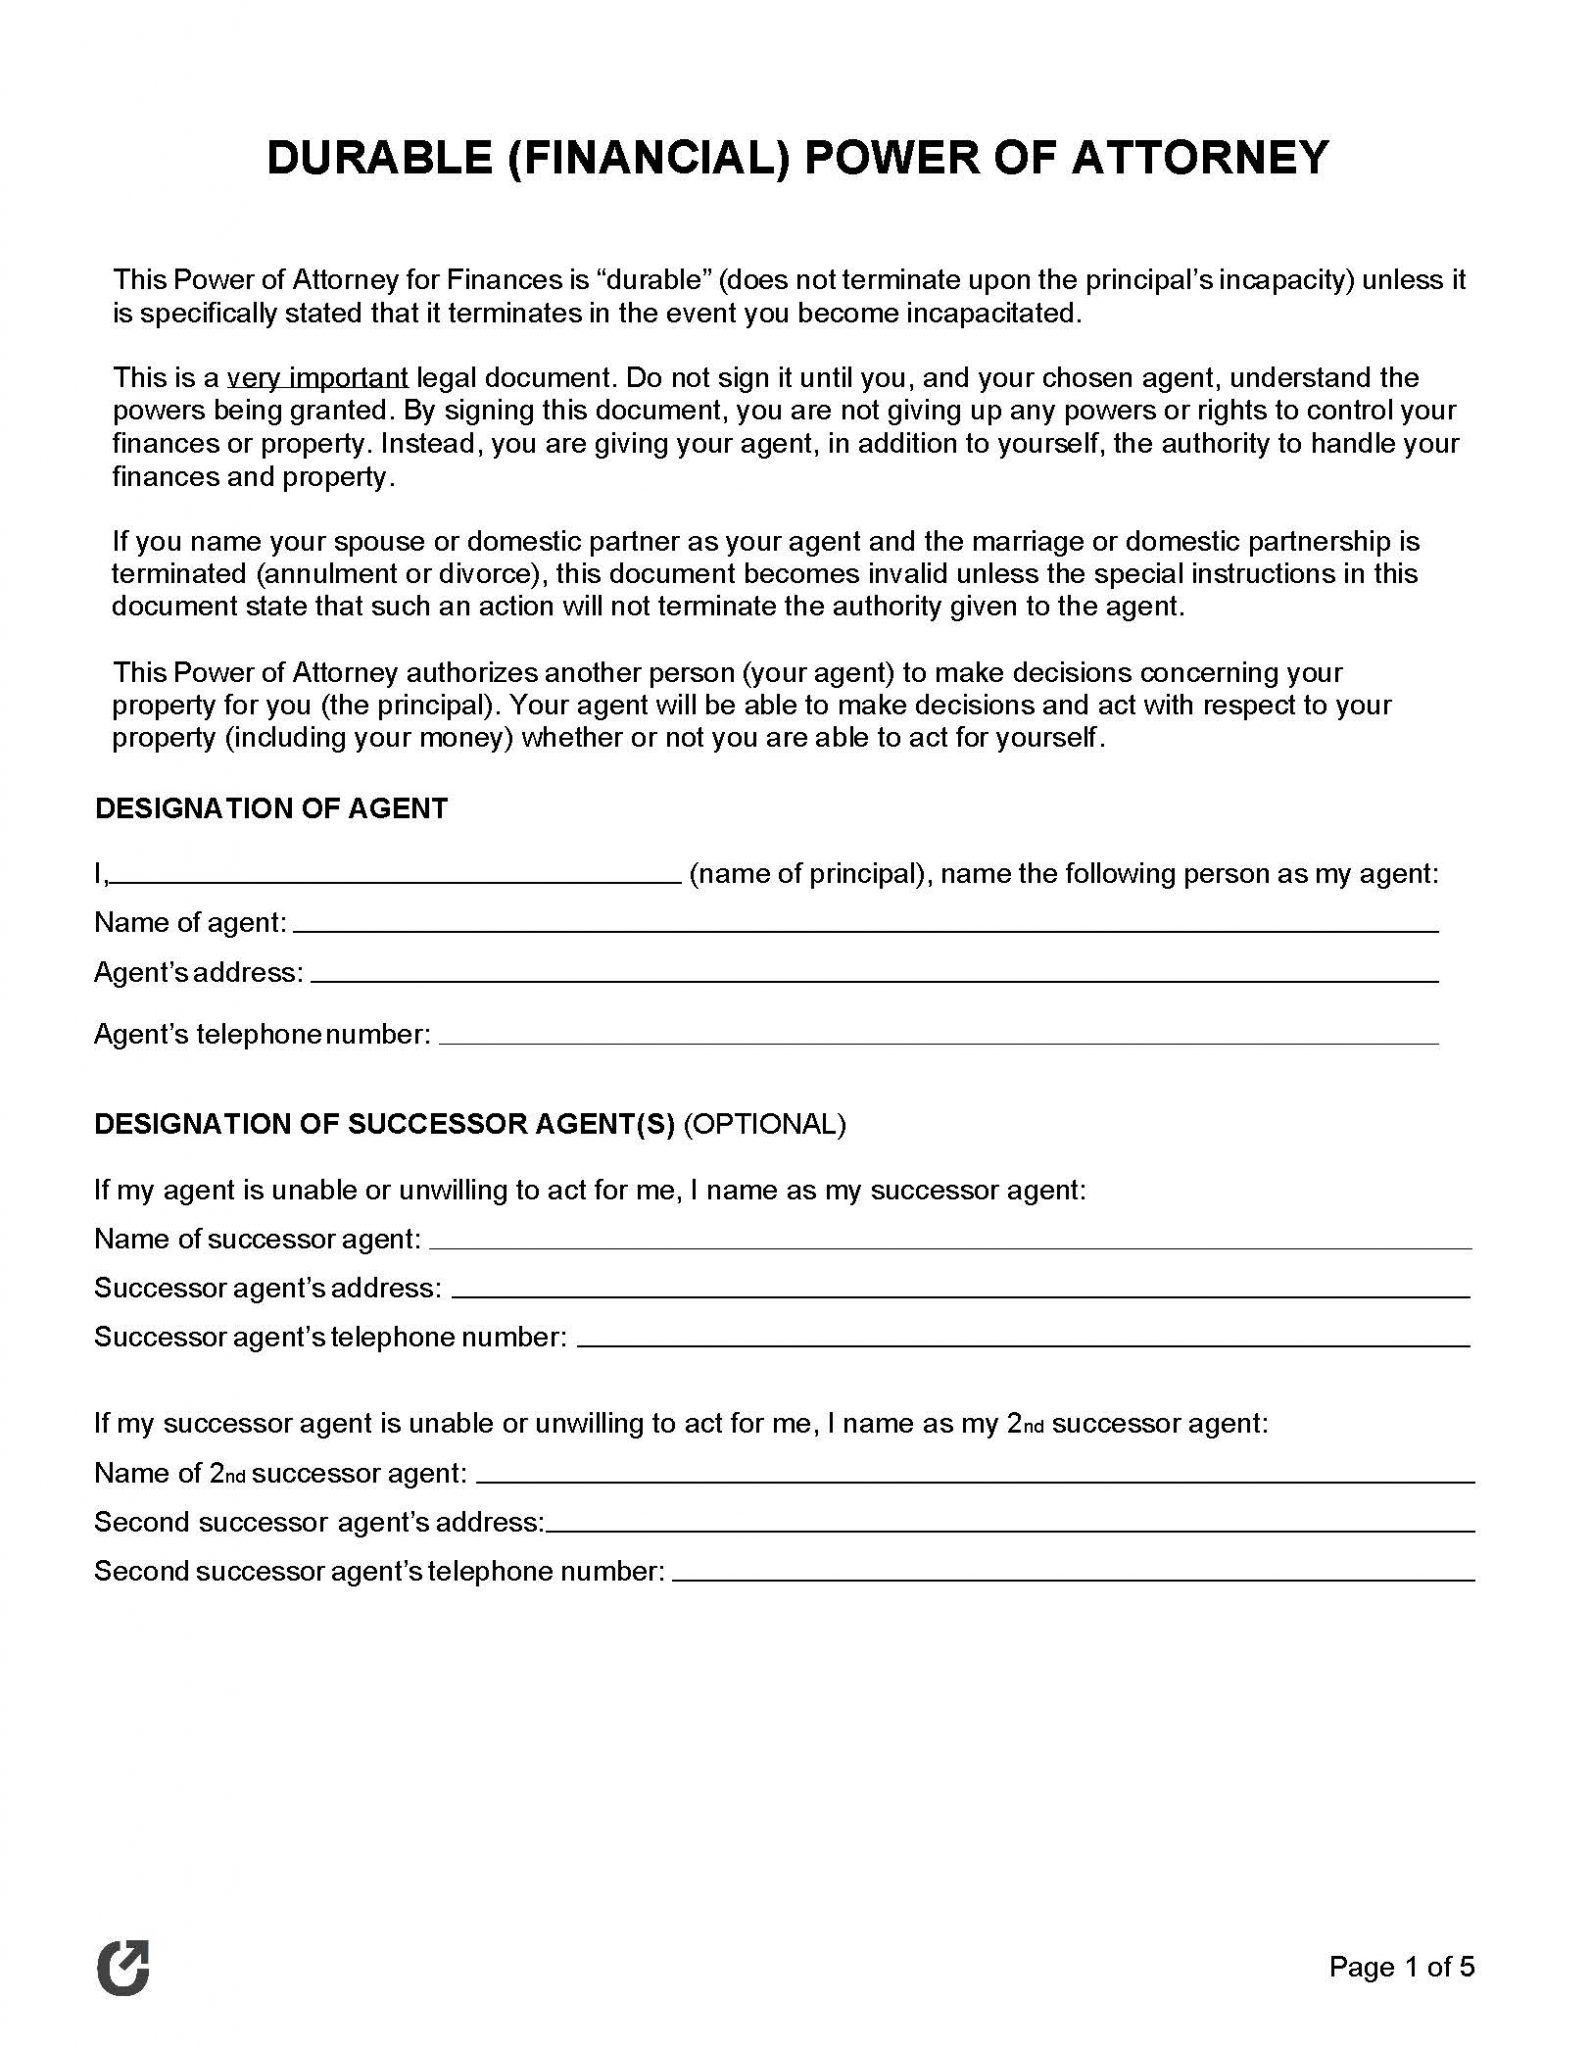 Free Durable Power of Attorney Forms PDF WORD